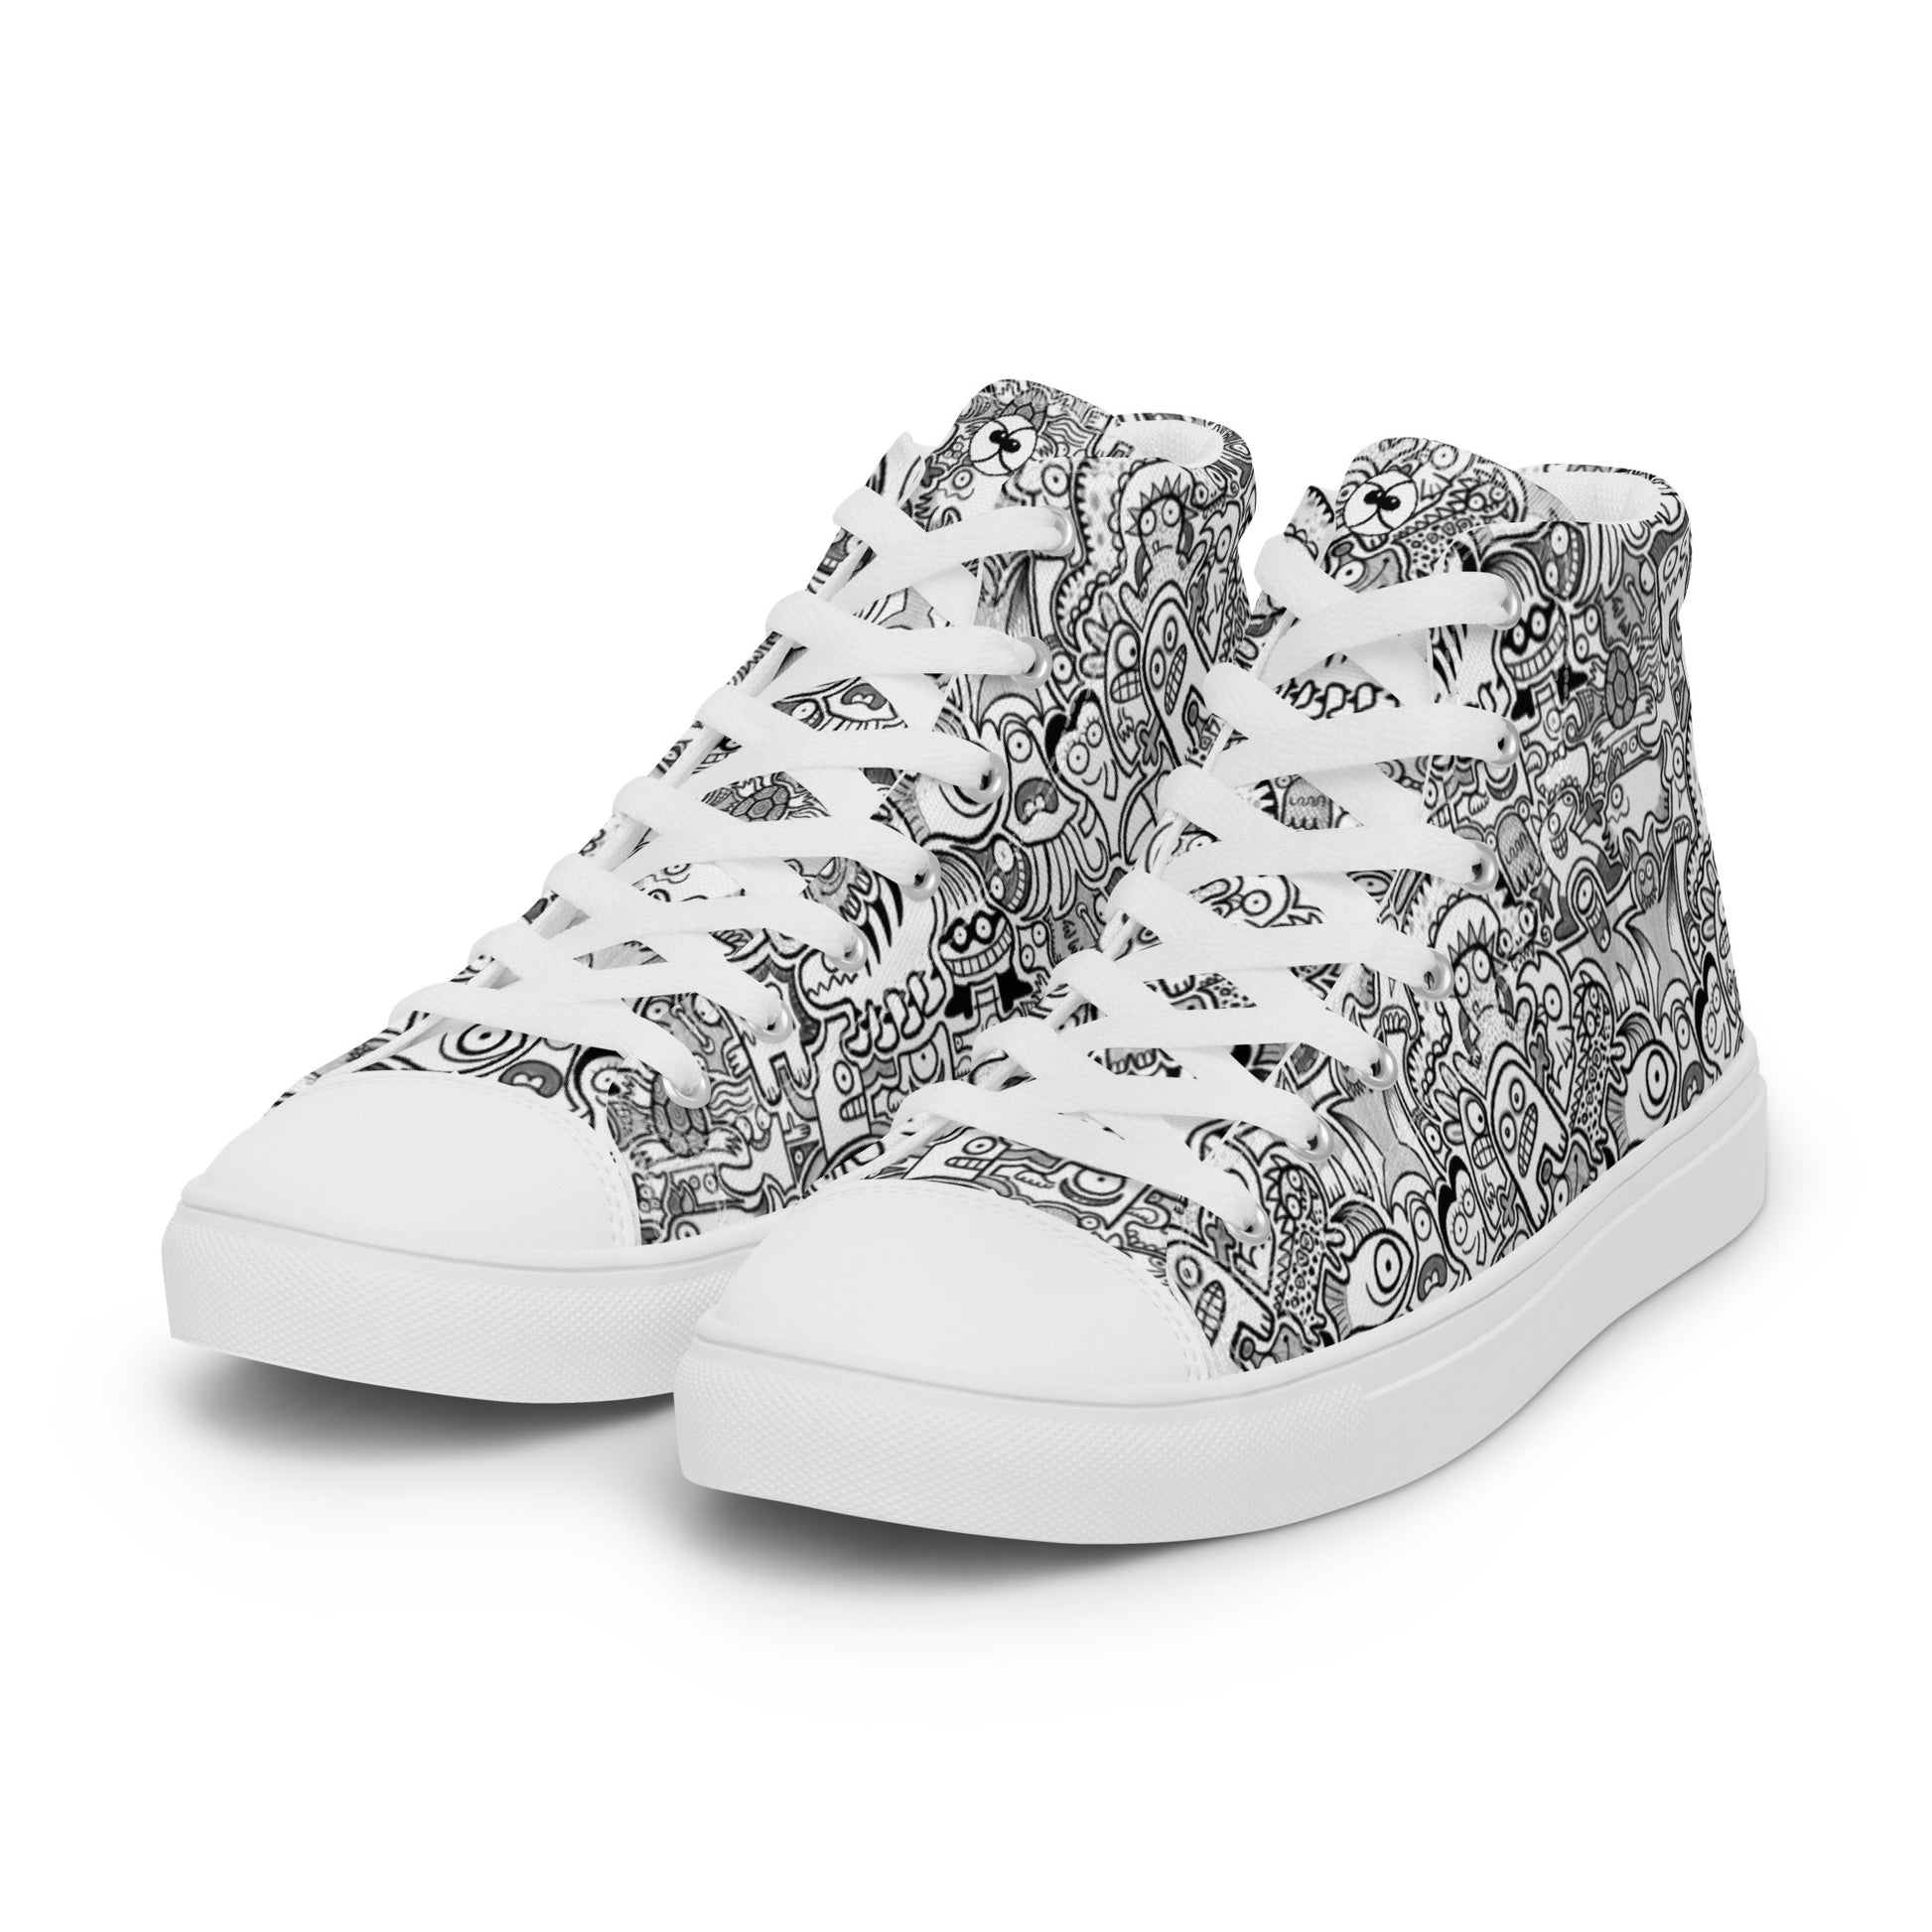 Fill your world with cool doodles Men’s high top canvas shoes. Overview